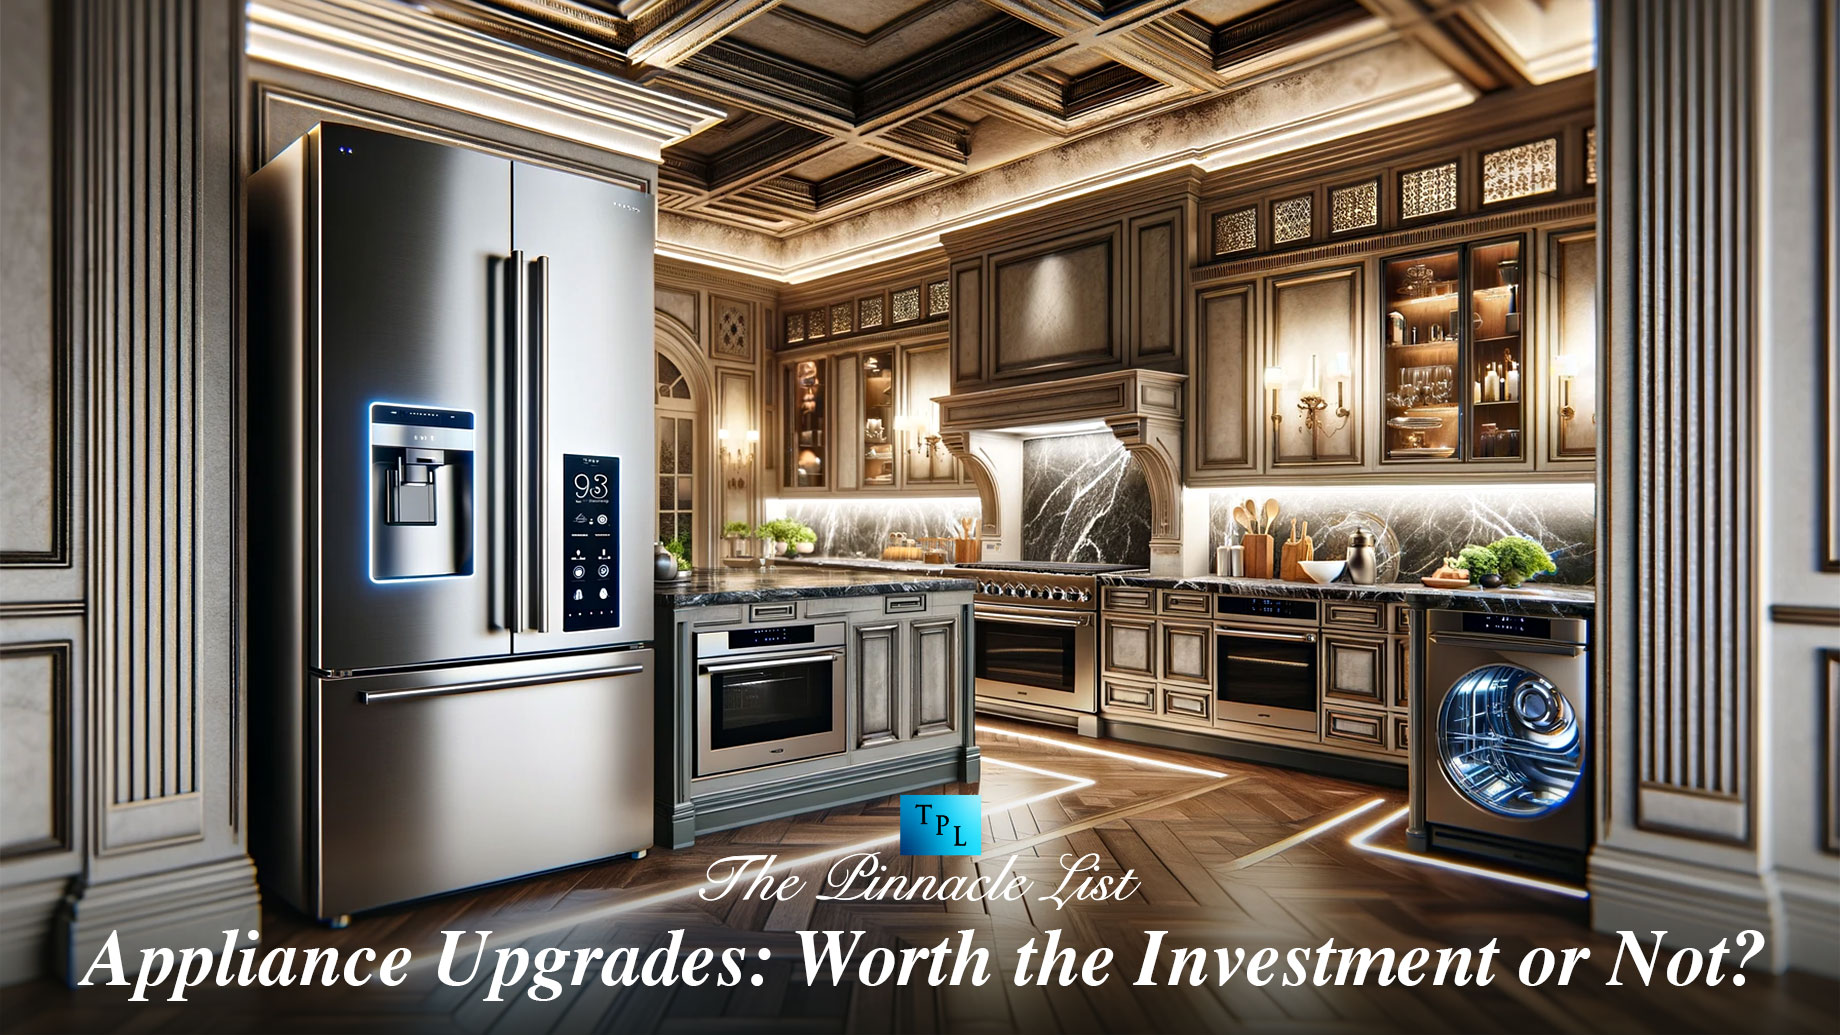 Appliance Upgrades: Worth the Investment or Not?